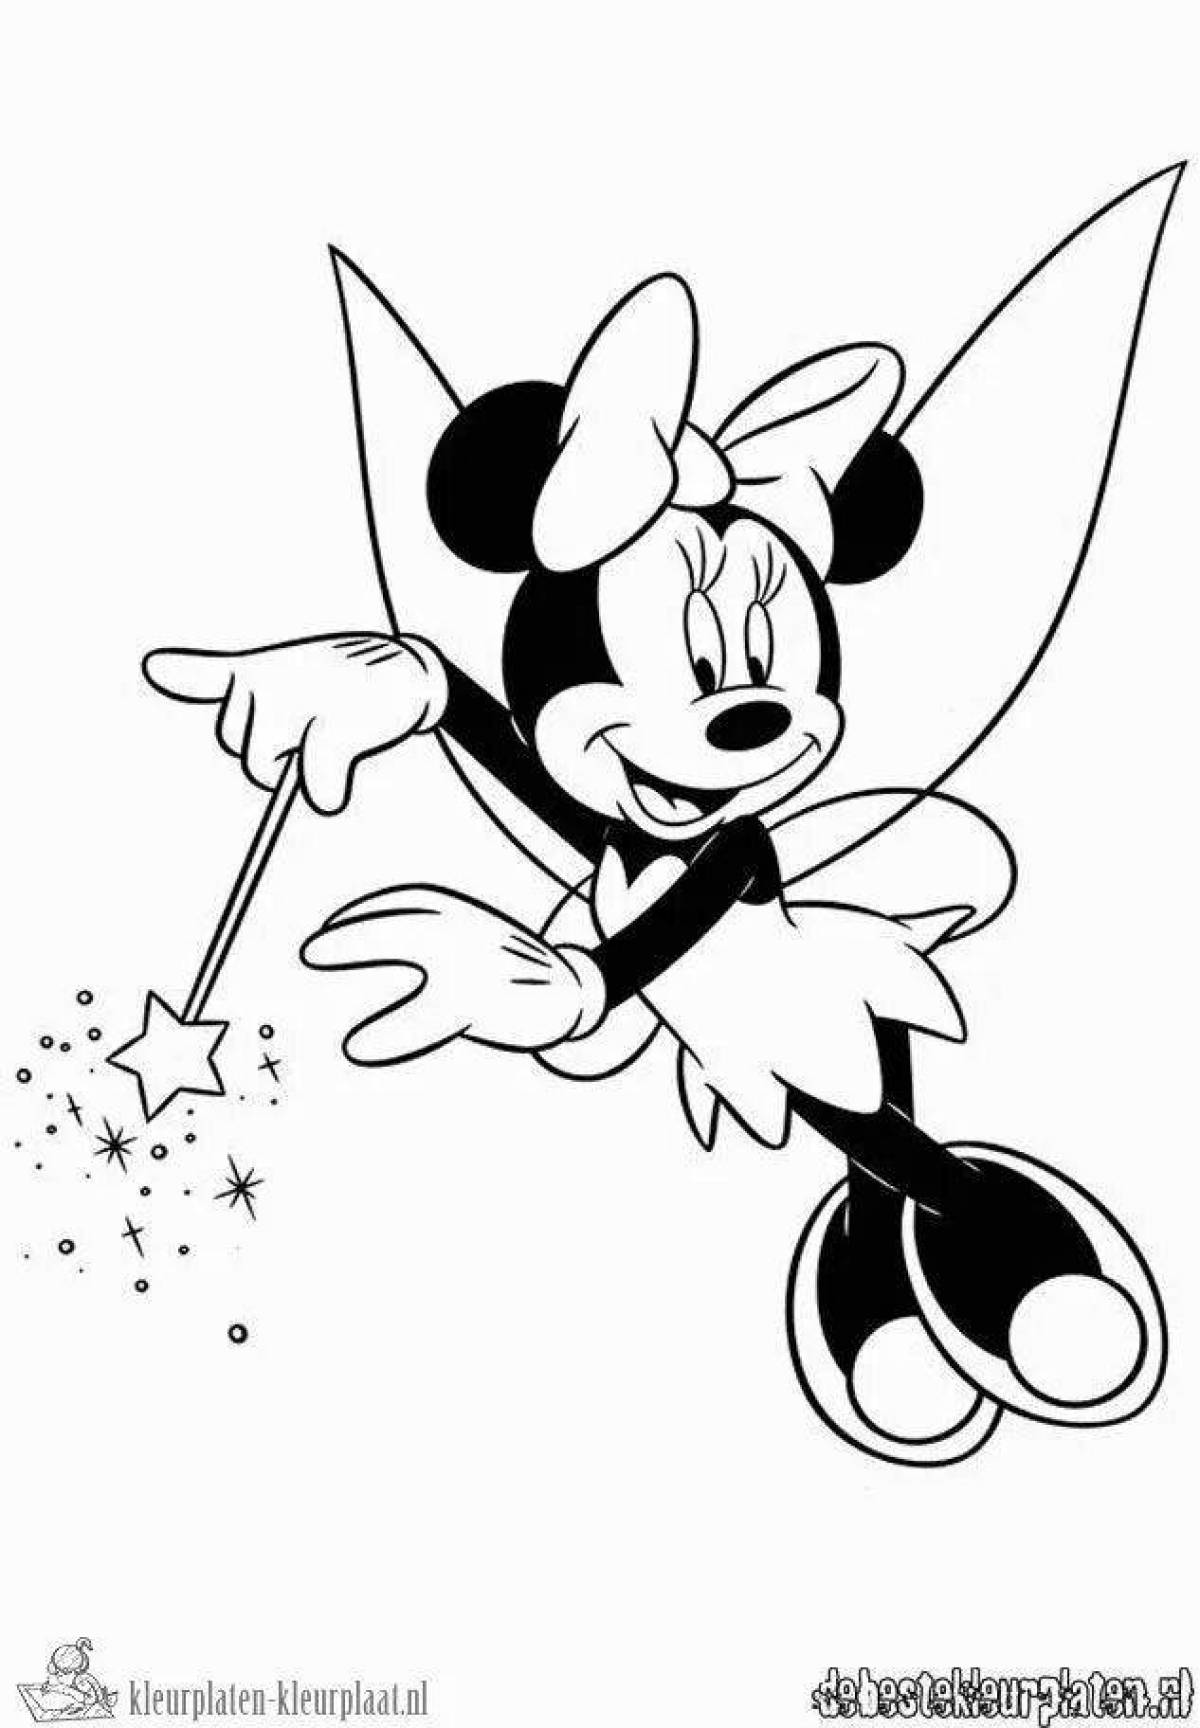 Lovely coloring cartoon mouse